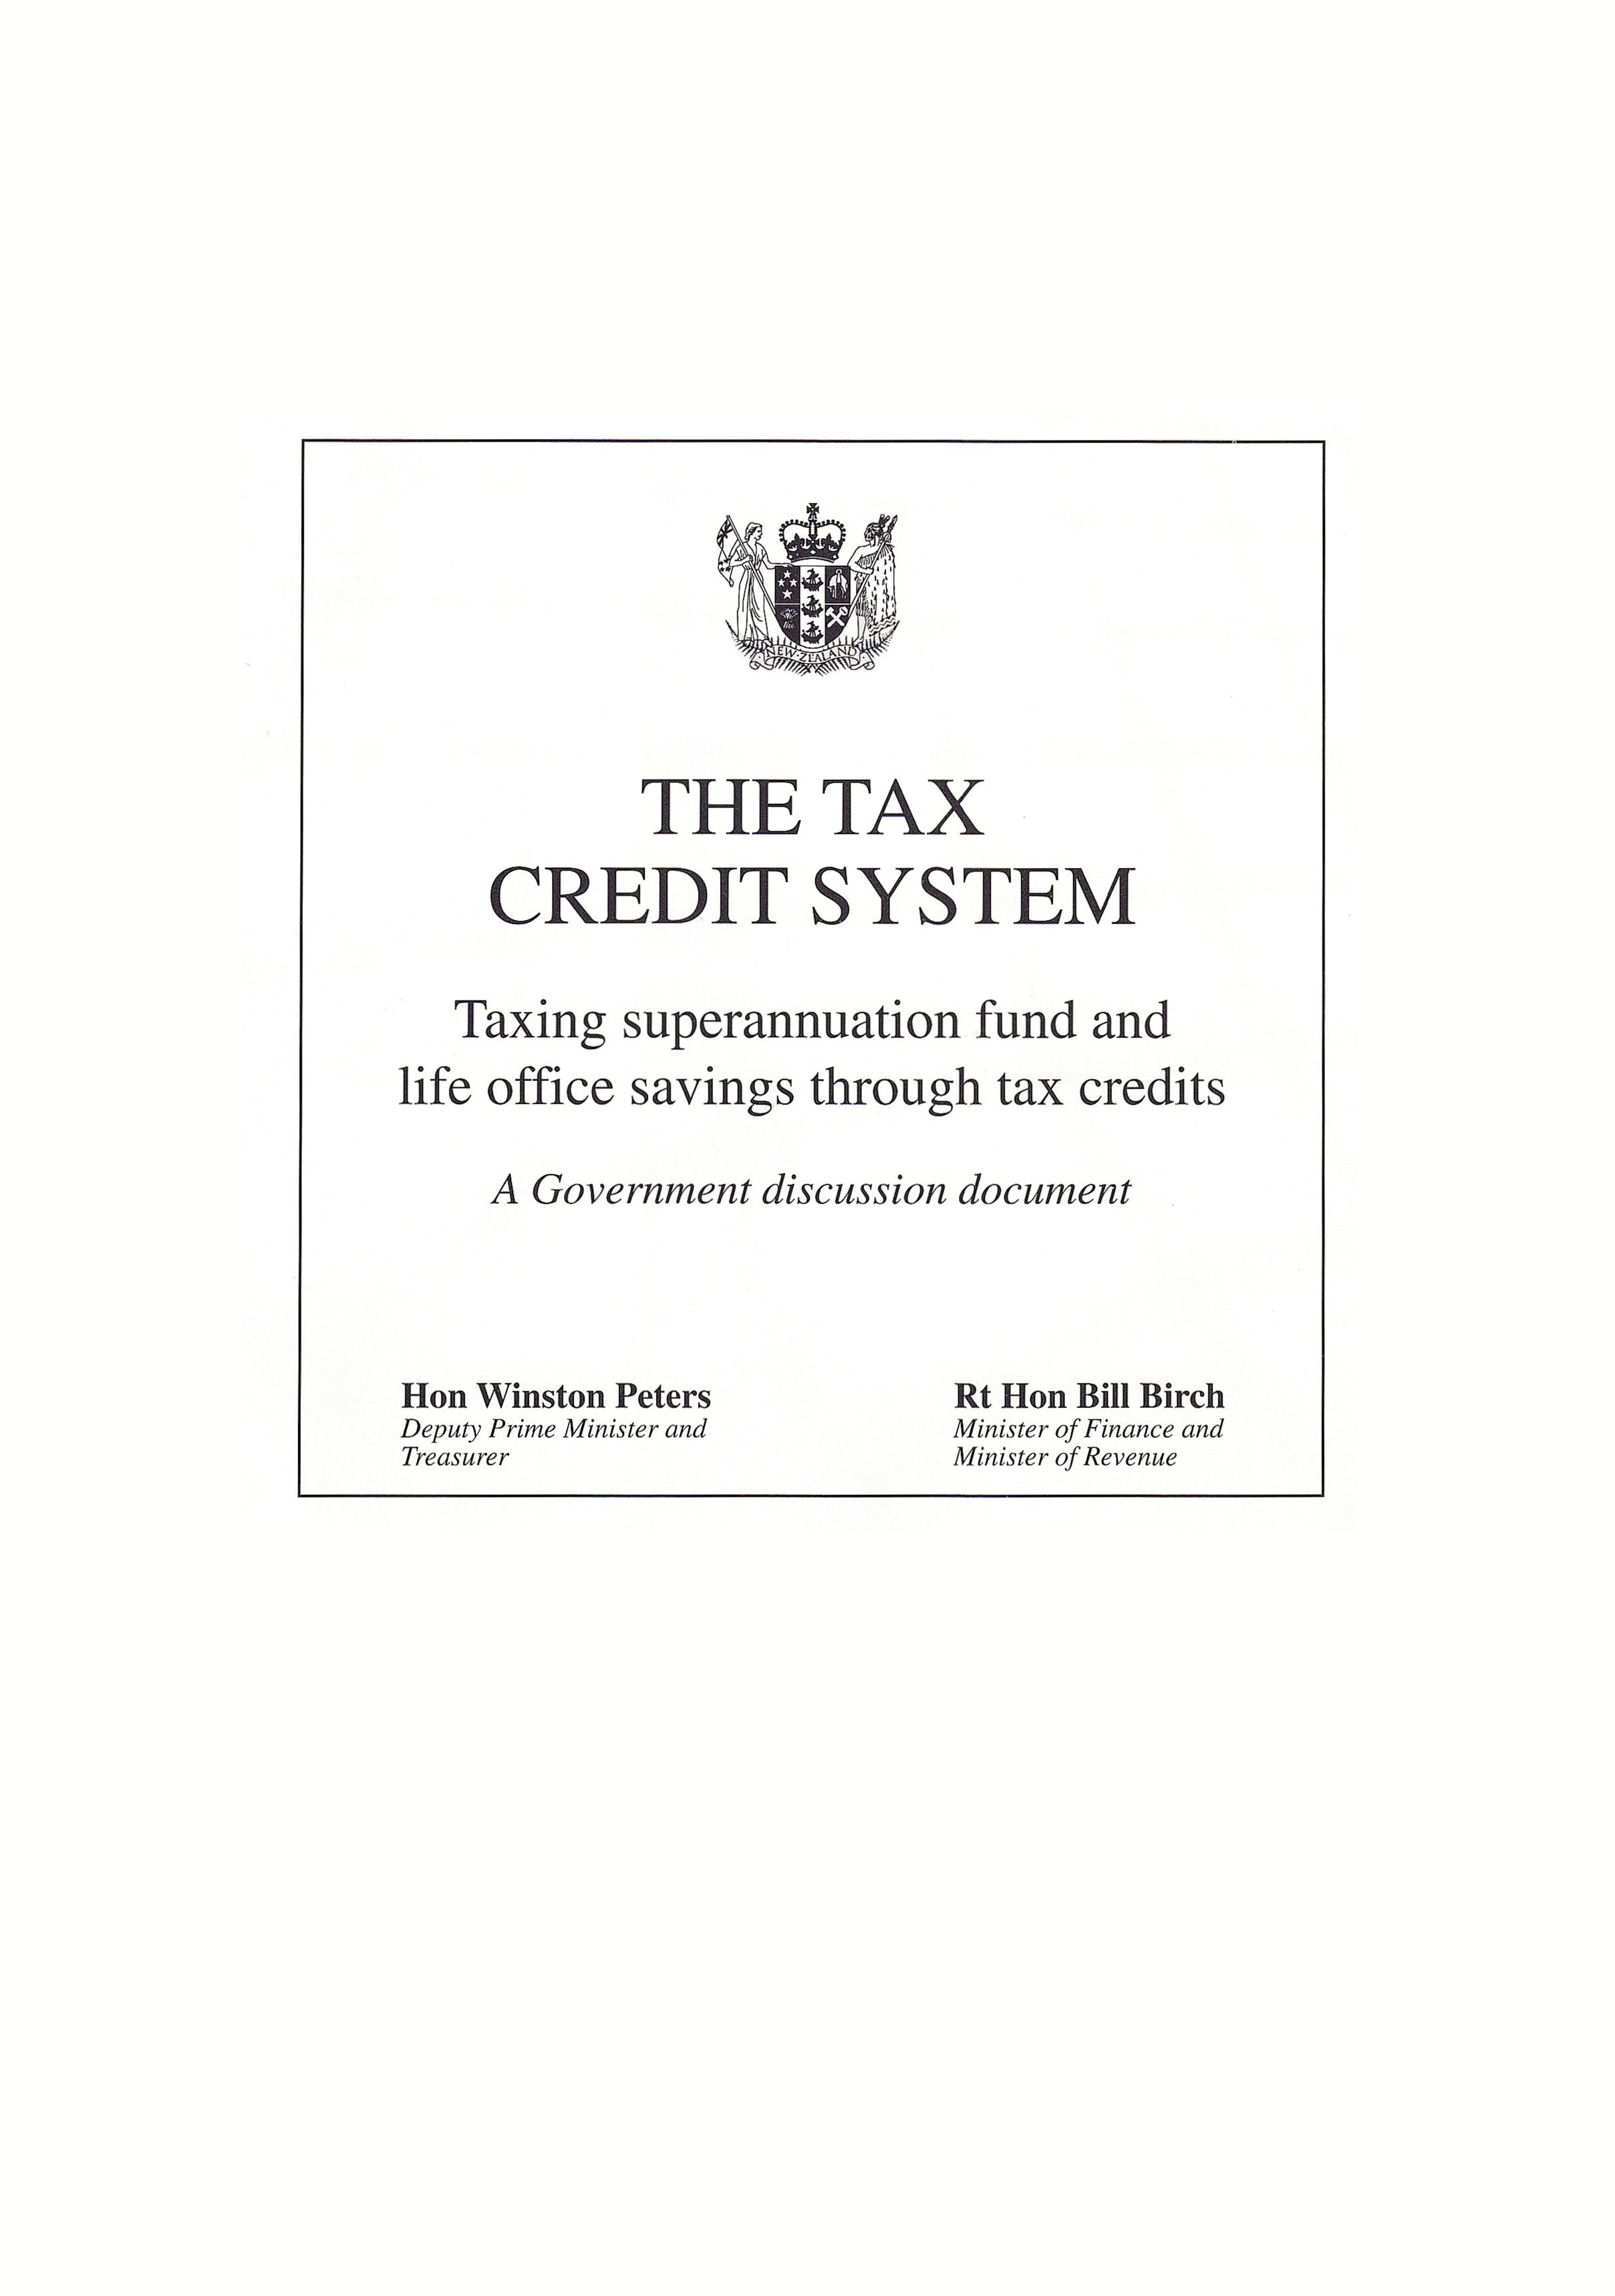 Publication cover page. Title = The tax credit system - taxing superannuation fund and life office savings through tax credits: A Government discussion document. August 1997.